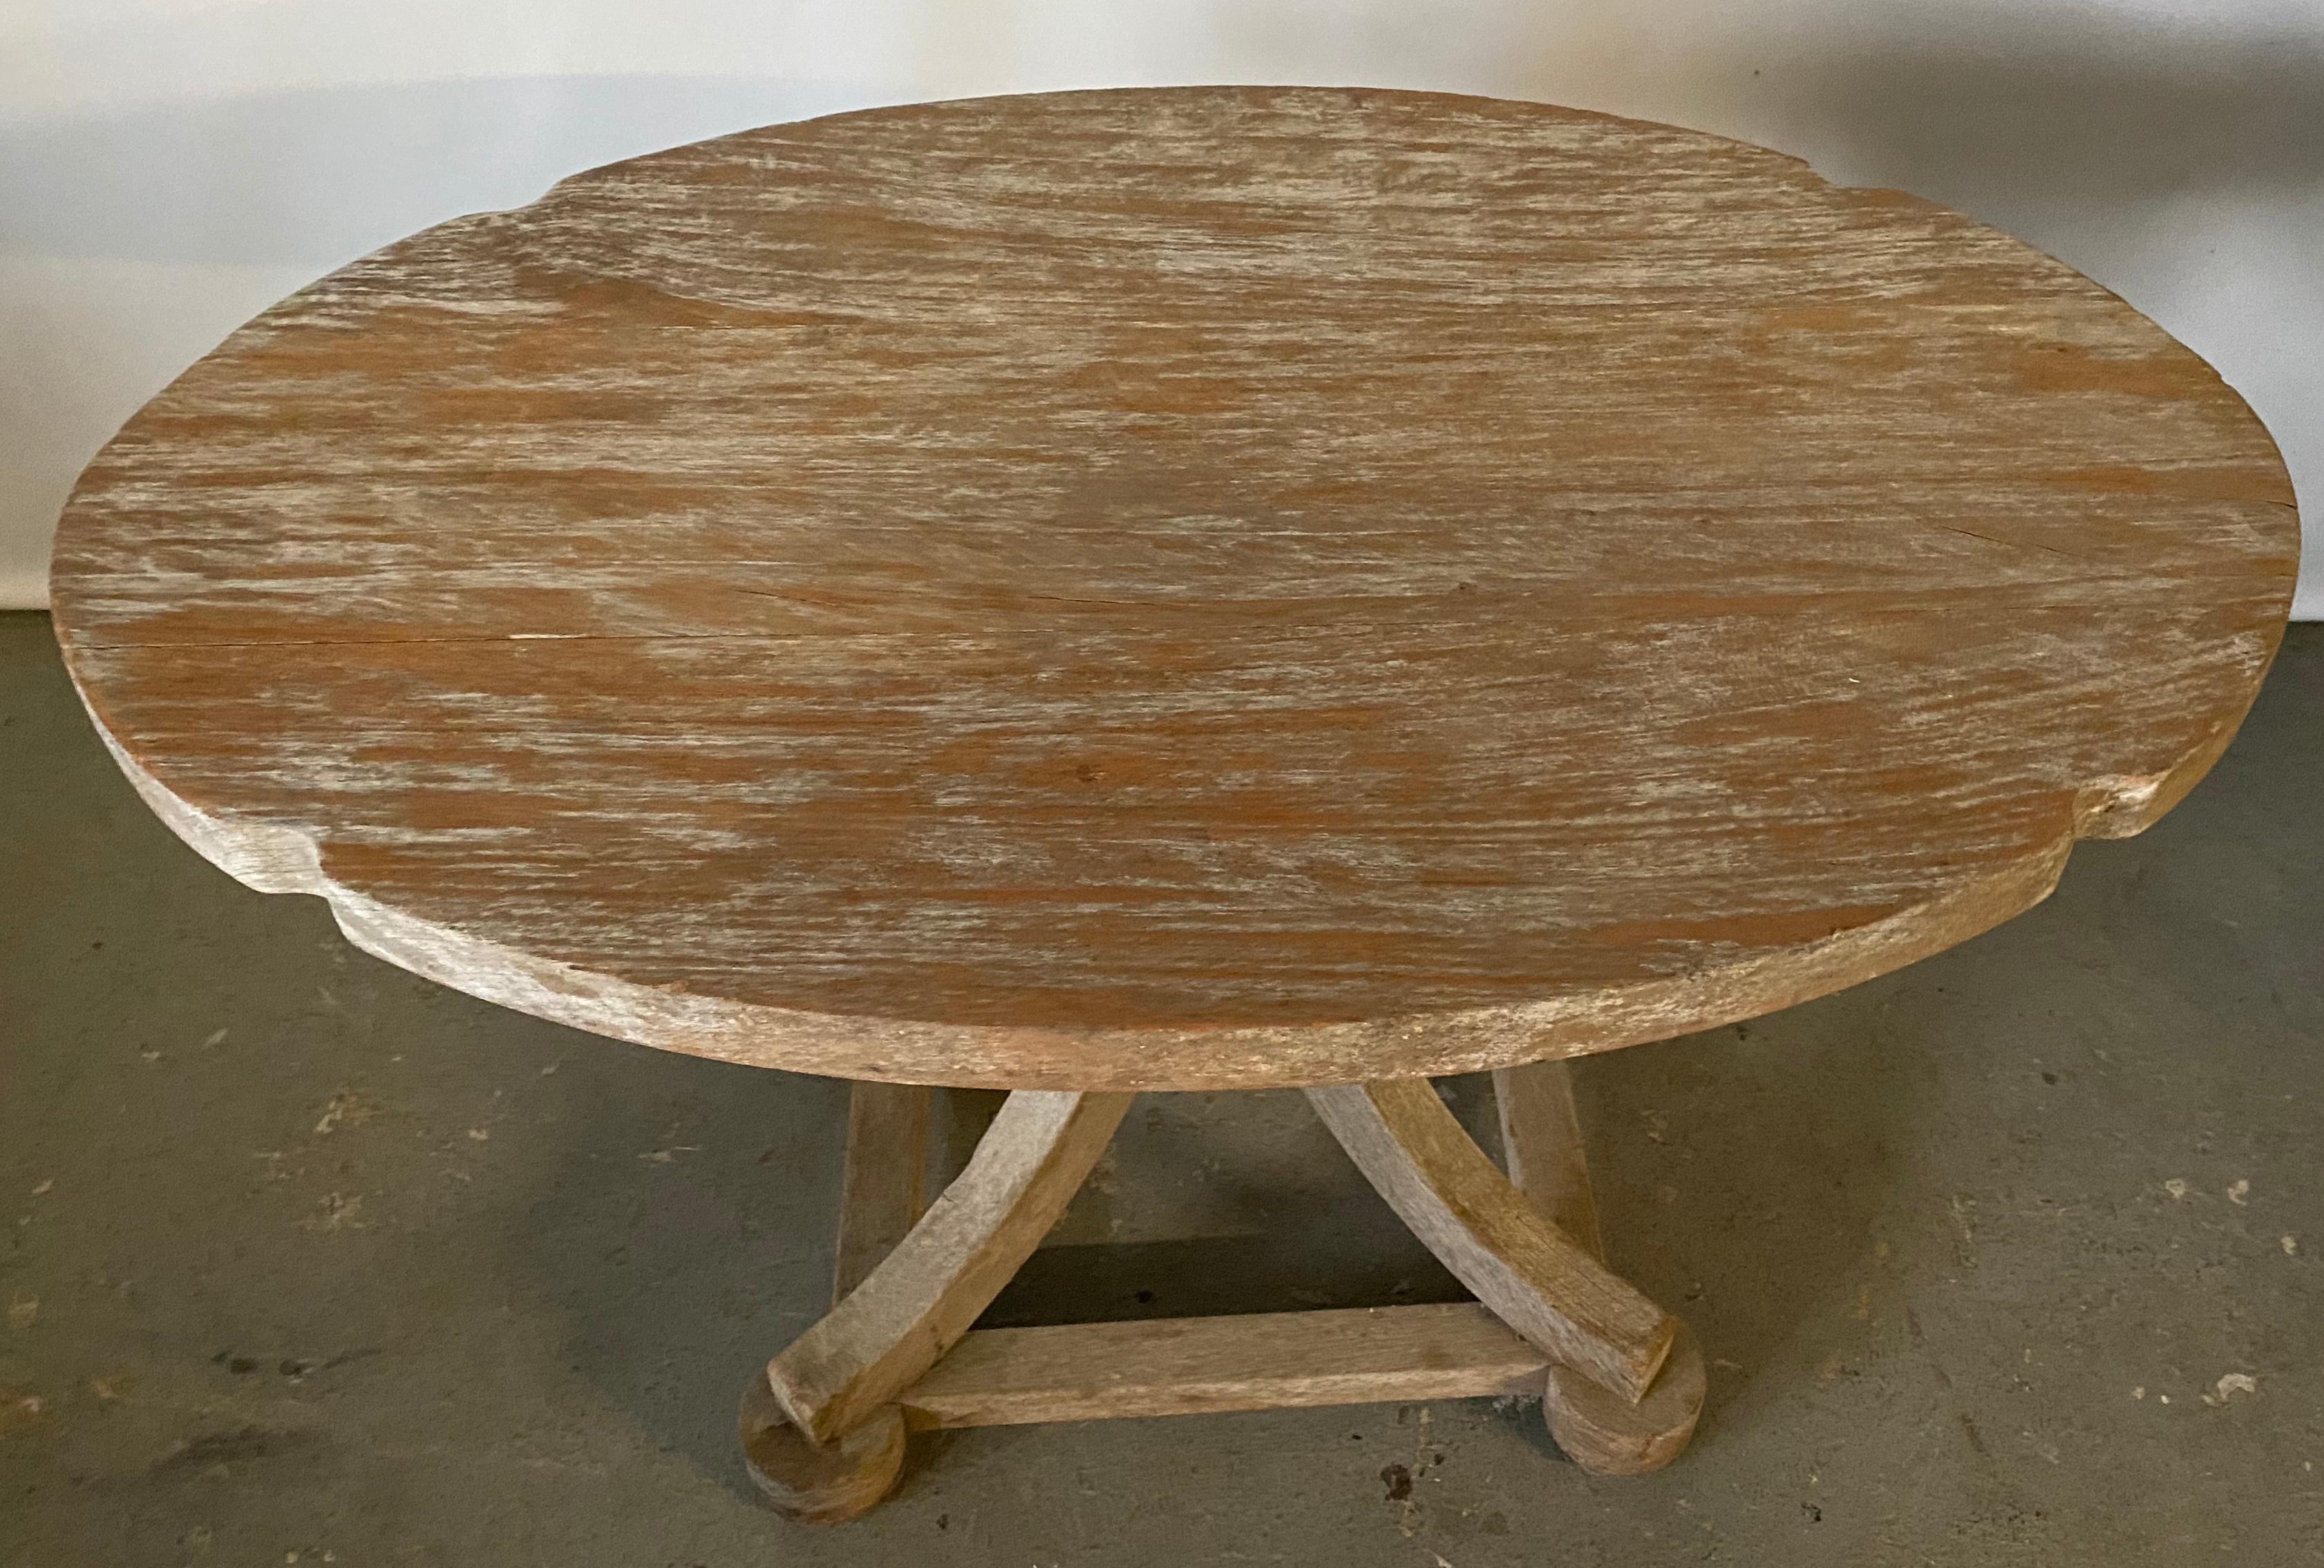 Swedish style rustic country teak table can be used indoors or outdoors. Great as a coffee table or end table on the porch, patio, in formal or casual setting.
Marked Munder Old Chatham New York.